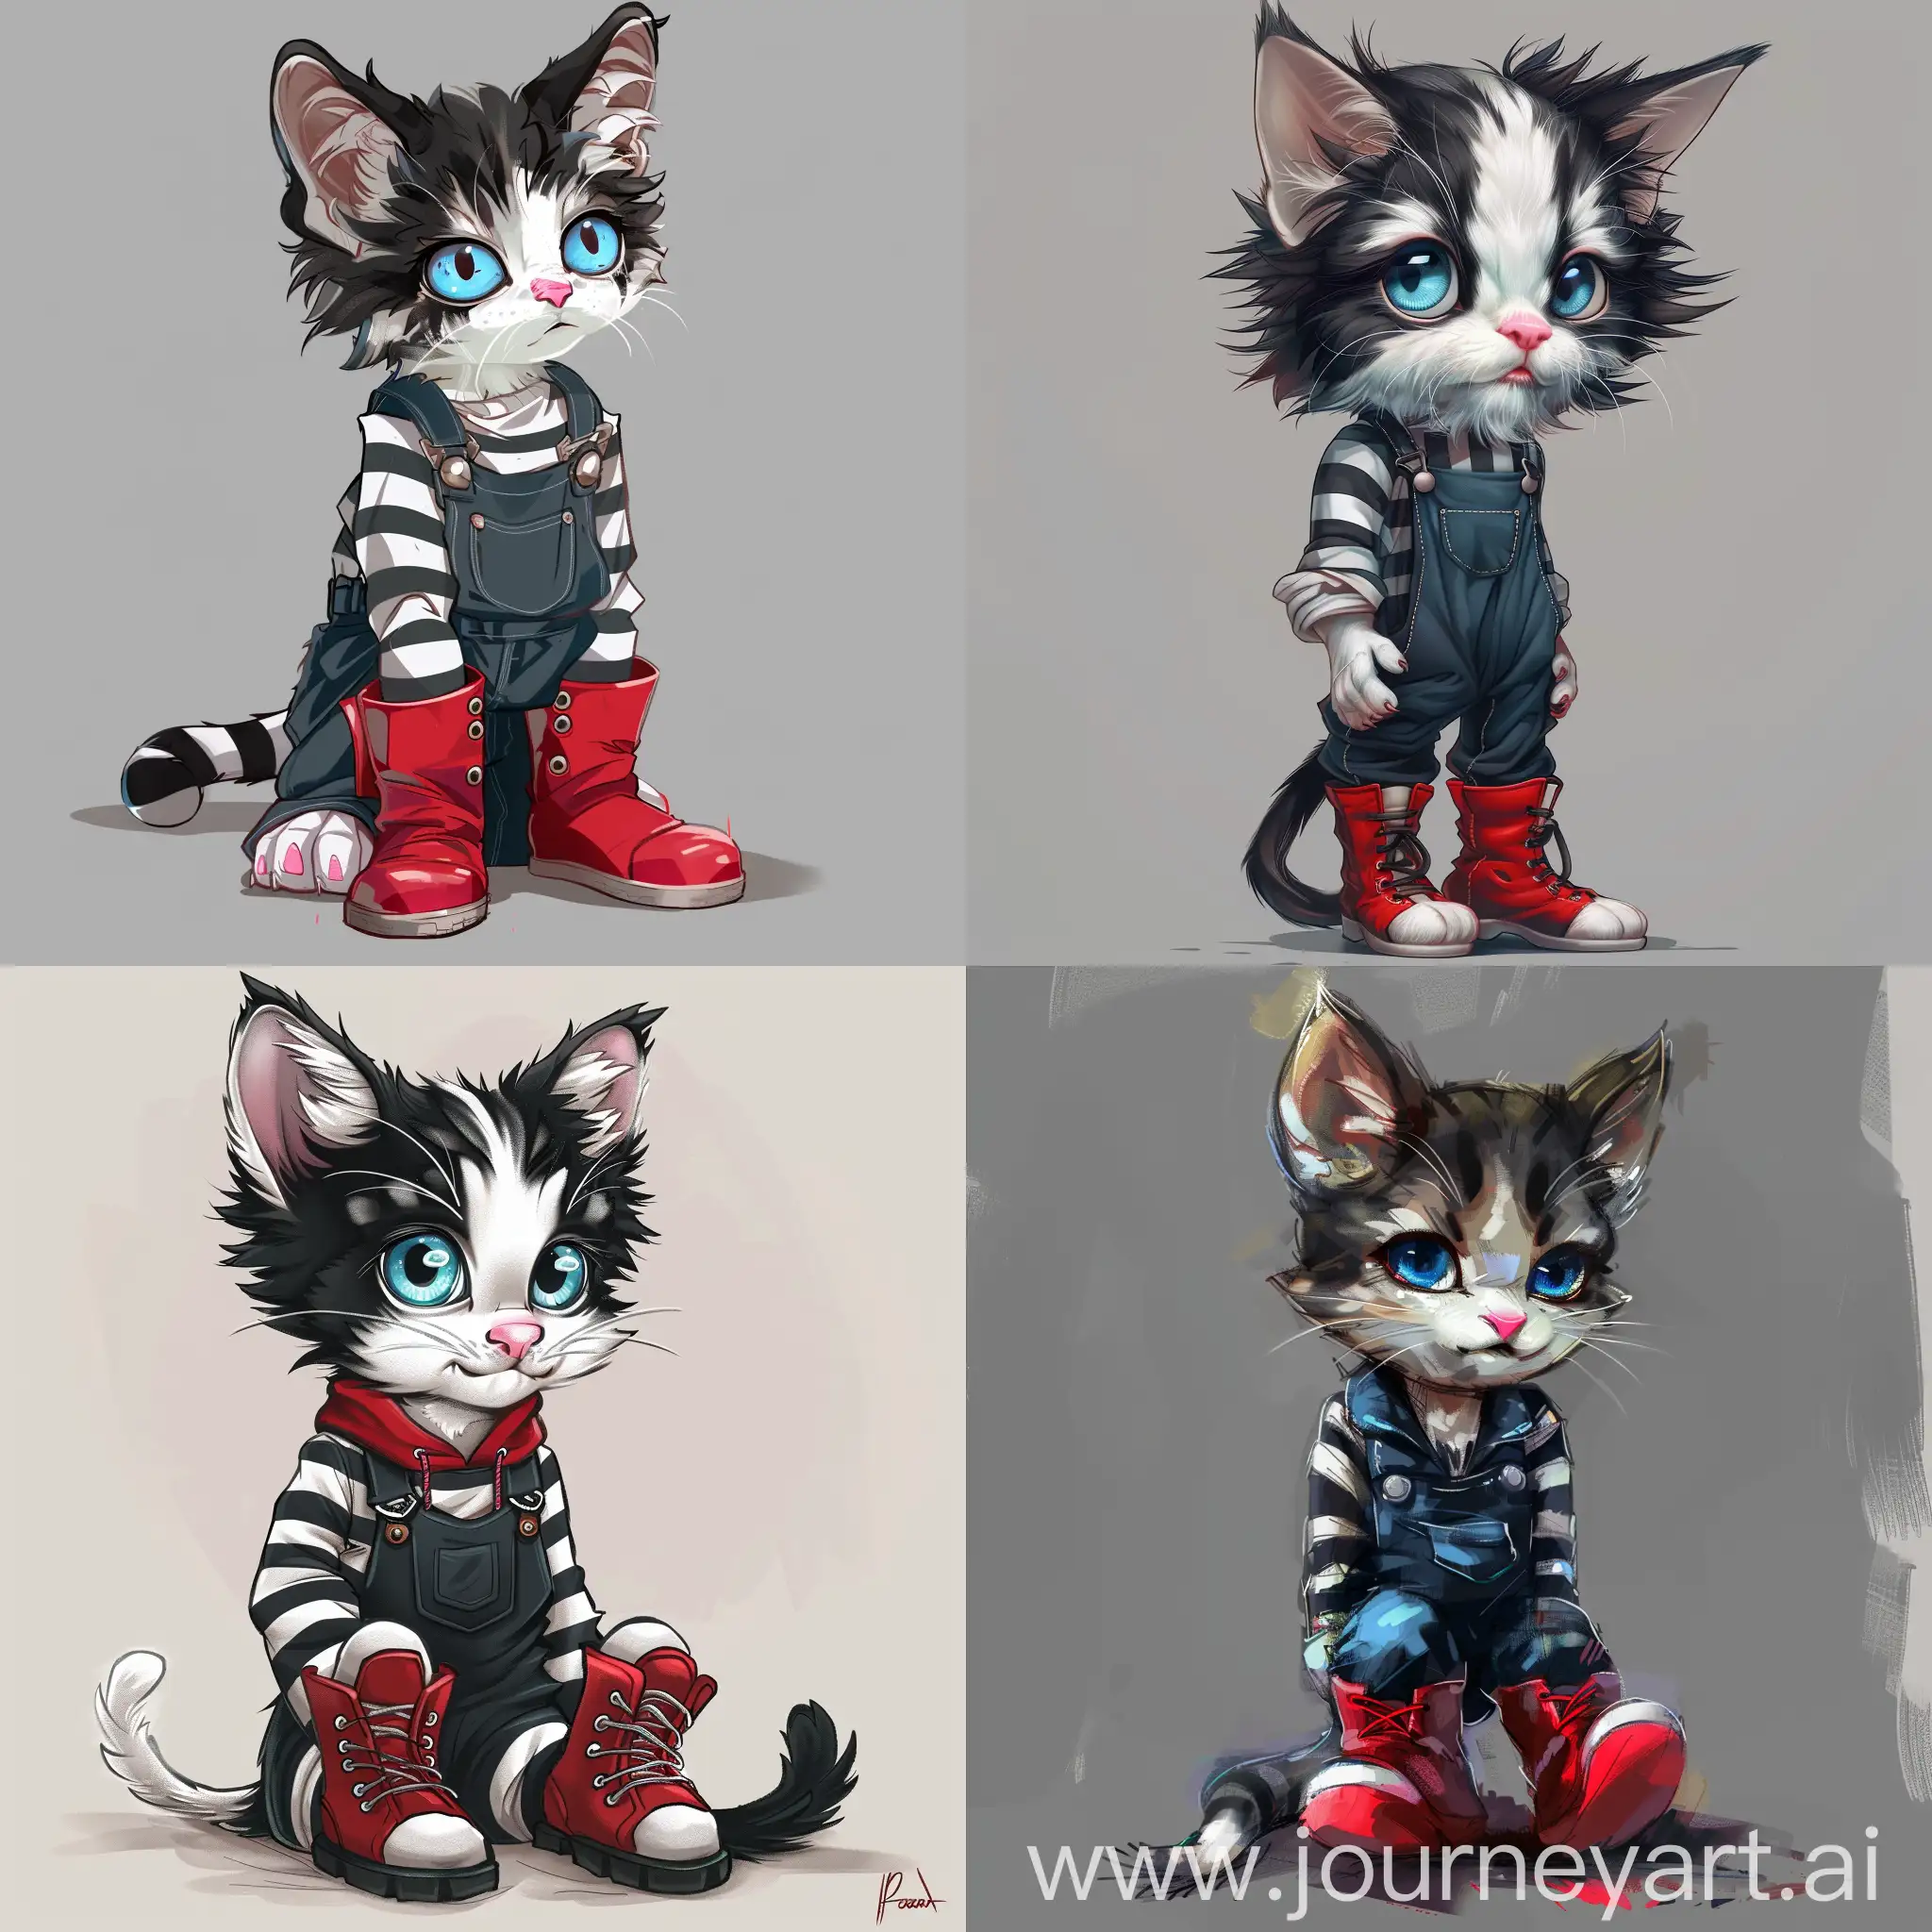 Furry-Fandom-Mascot-in-Black-and-White-Stripes-with-Blue-Eyes